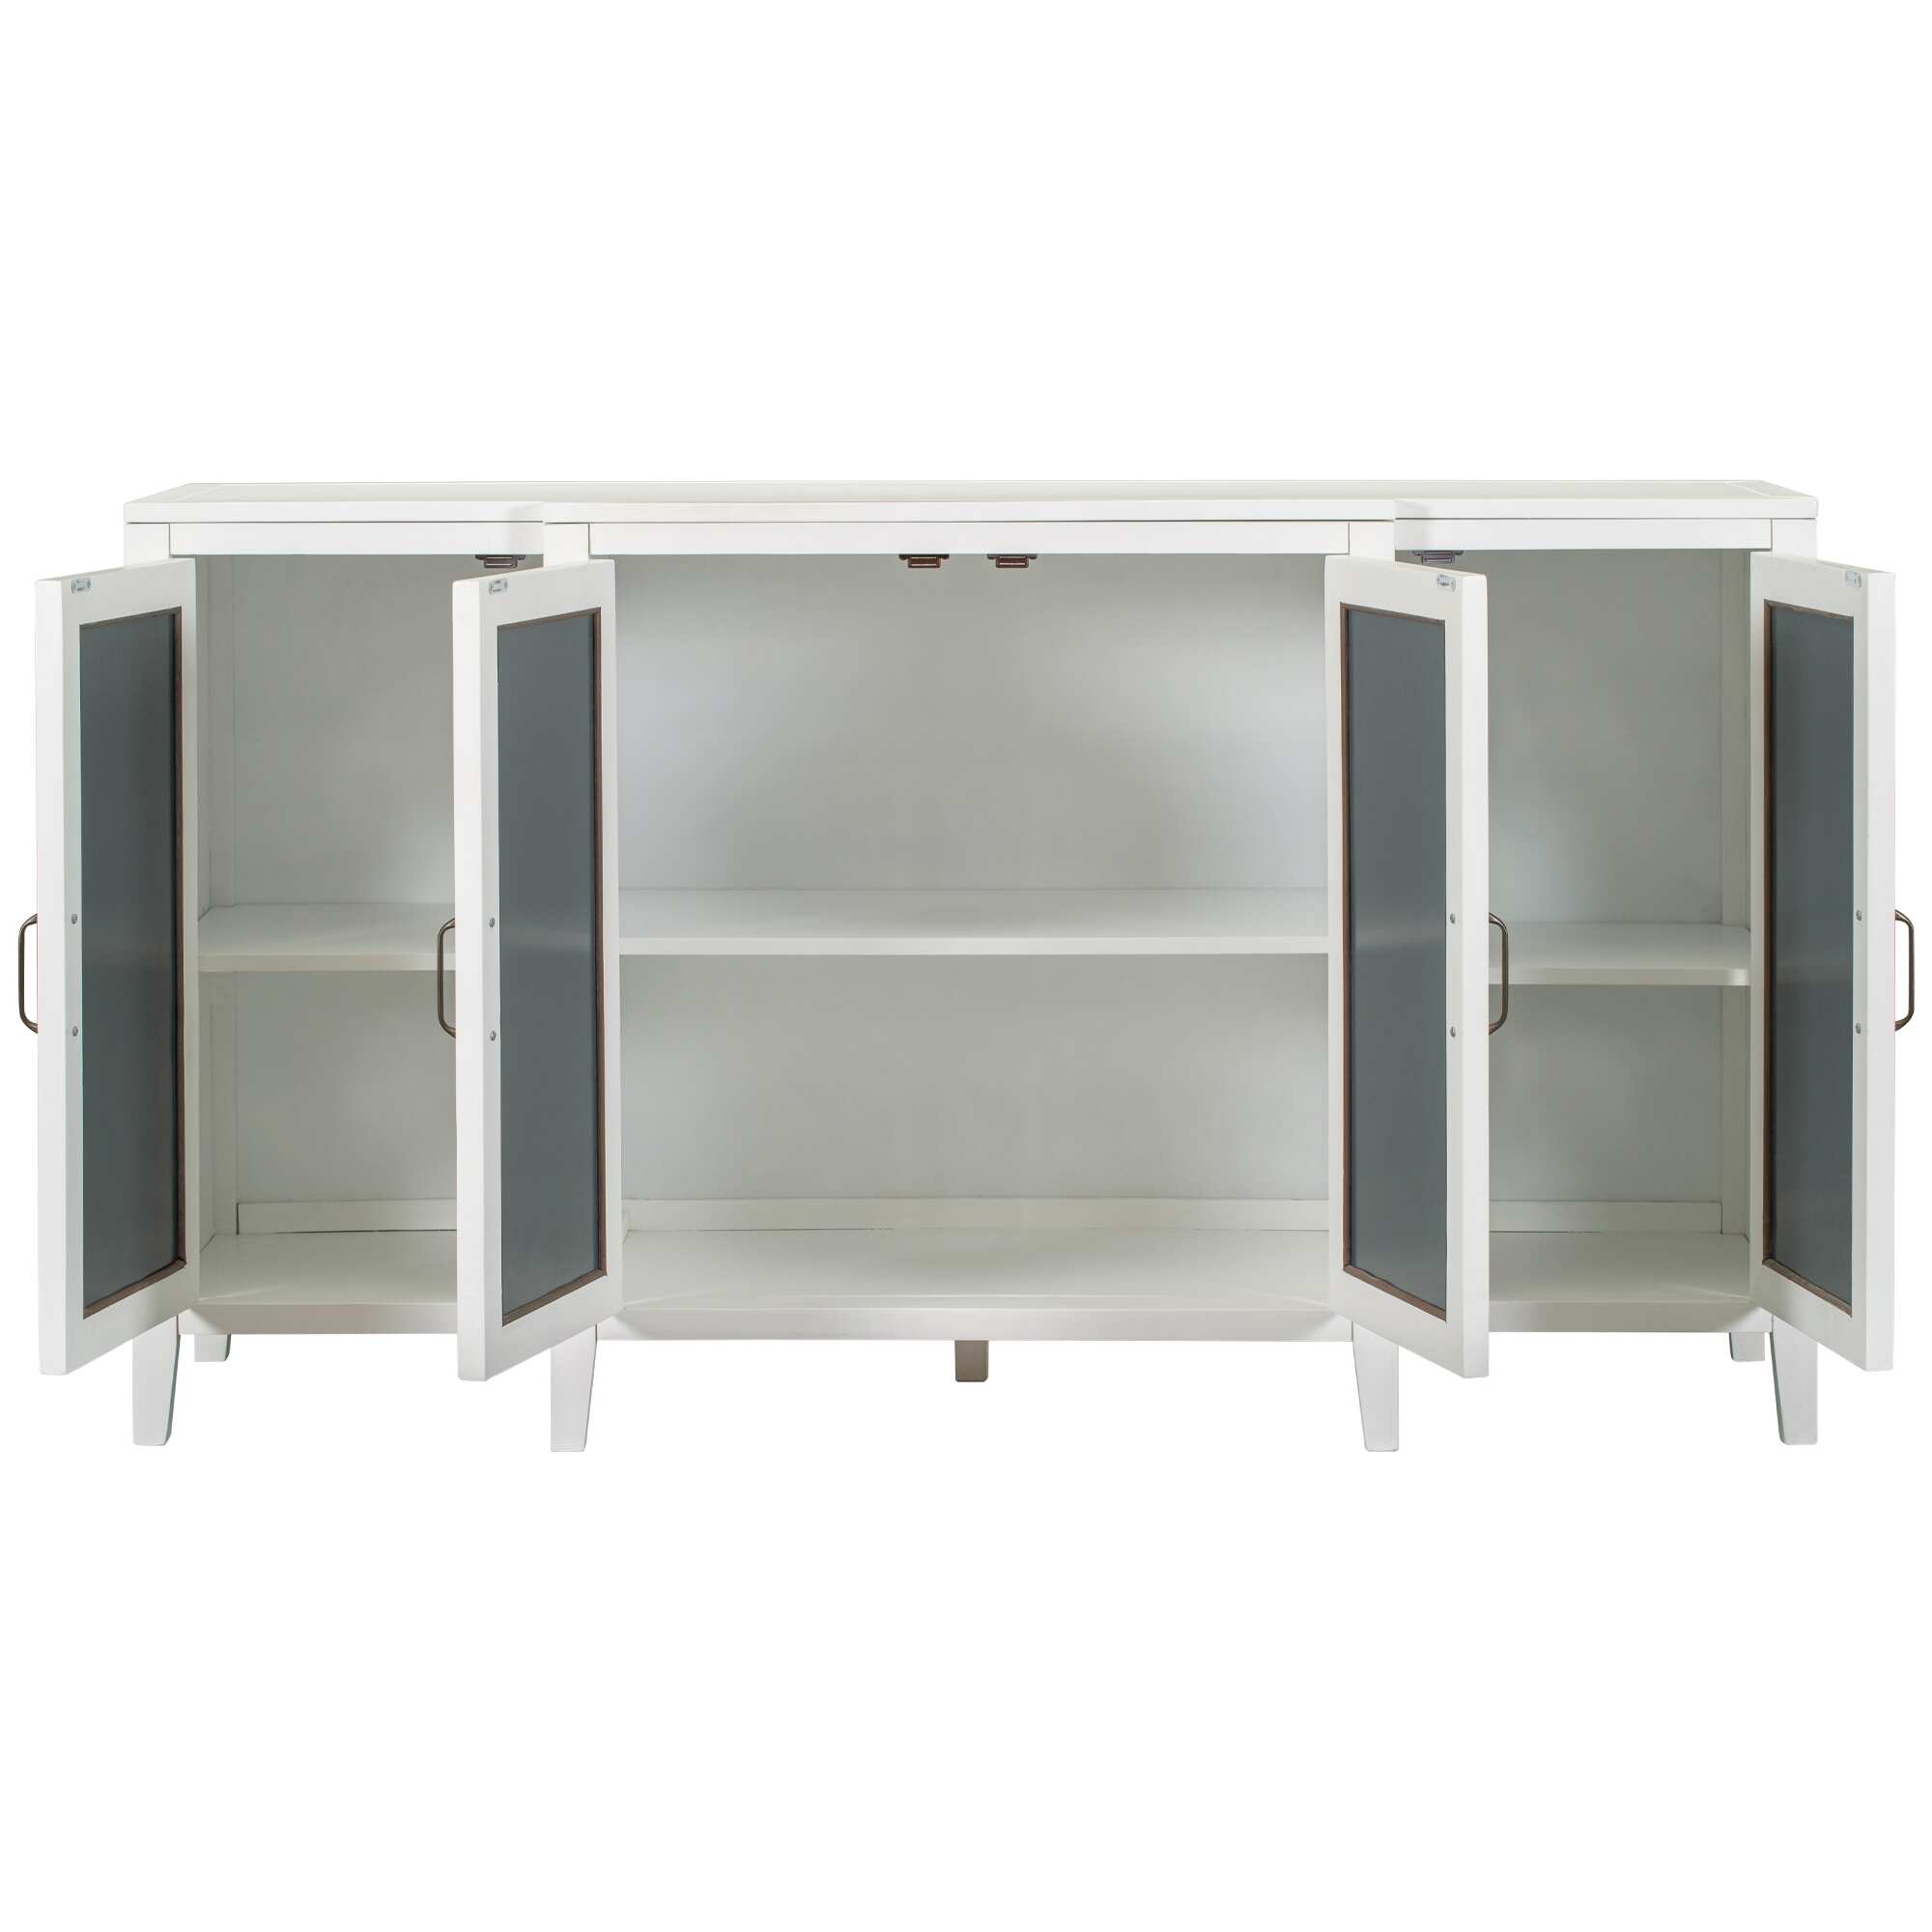 59.8" Console Table, Mid-century Mirrored Entryway Table Sofa Table